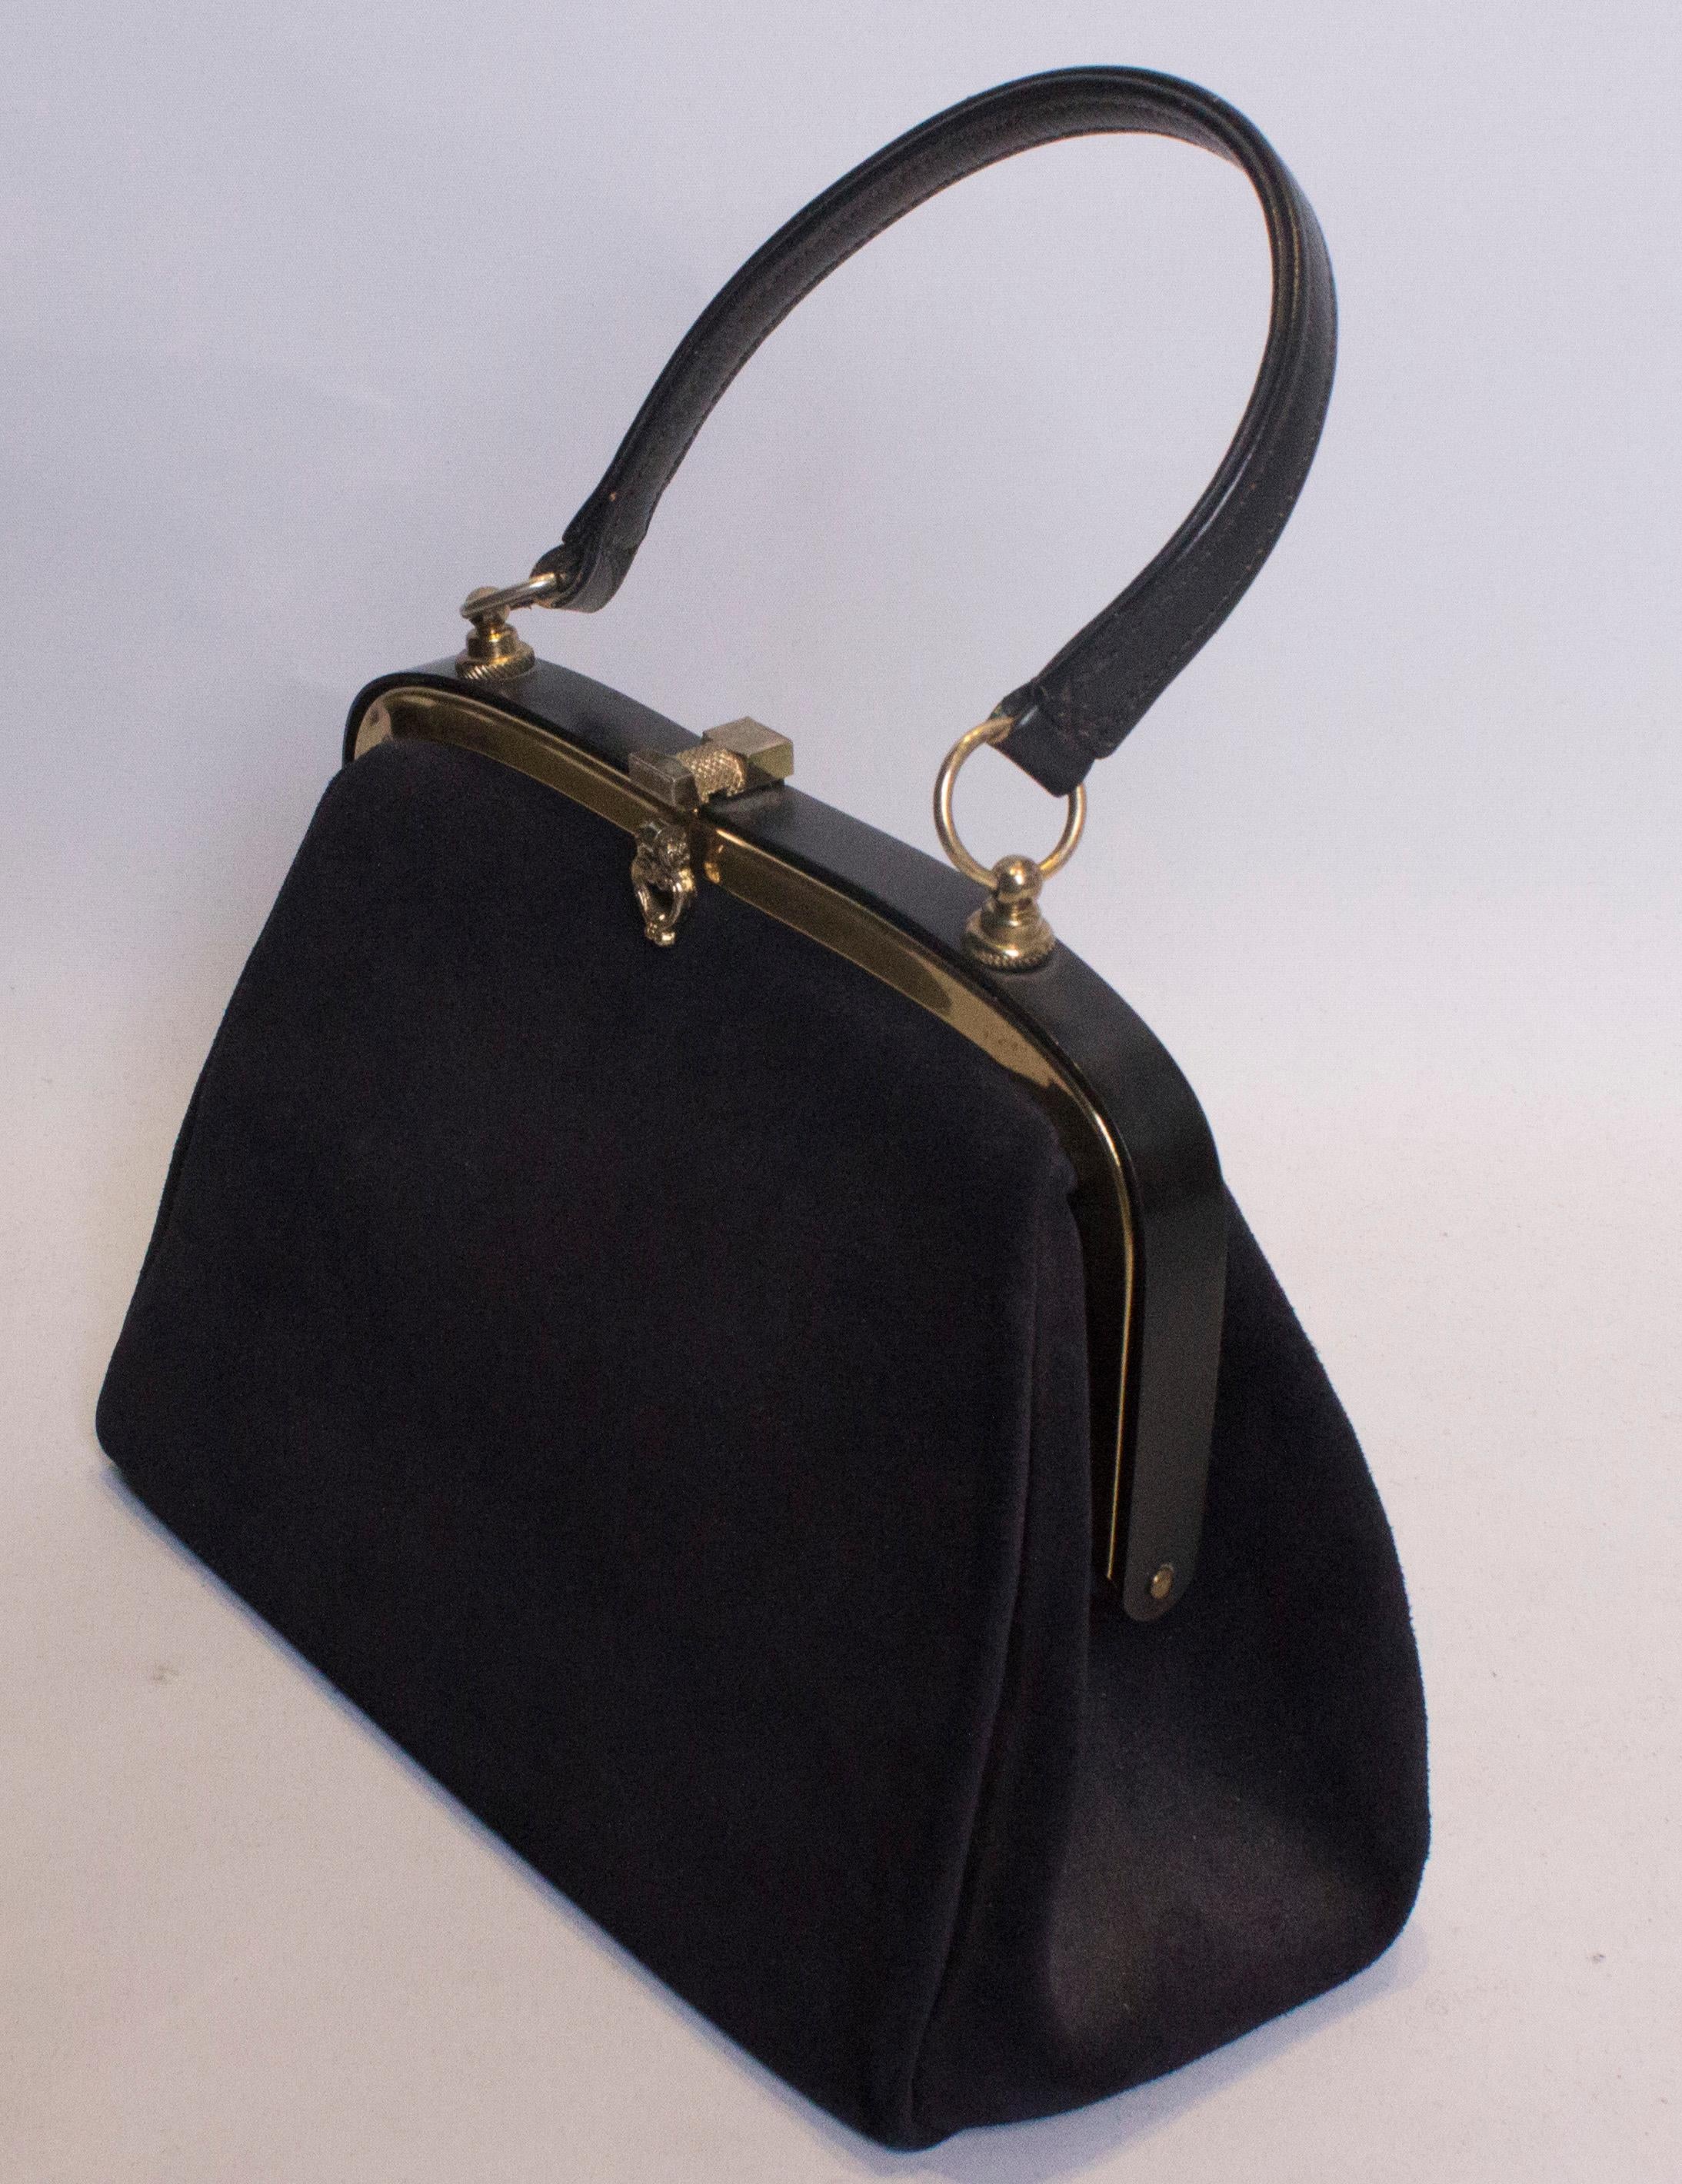 A chic top handle bag by Lederer for Russell and Bromley. The bag is in a nice dusty blue colour, with a central clasp and top handle. it has one internal zip pocket.